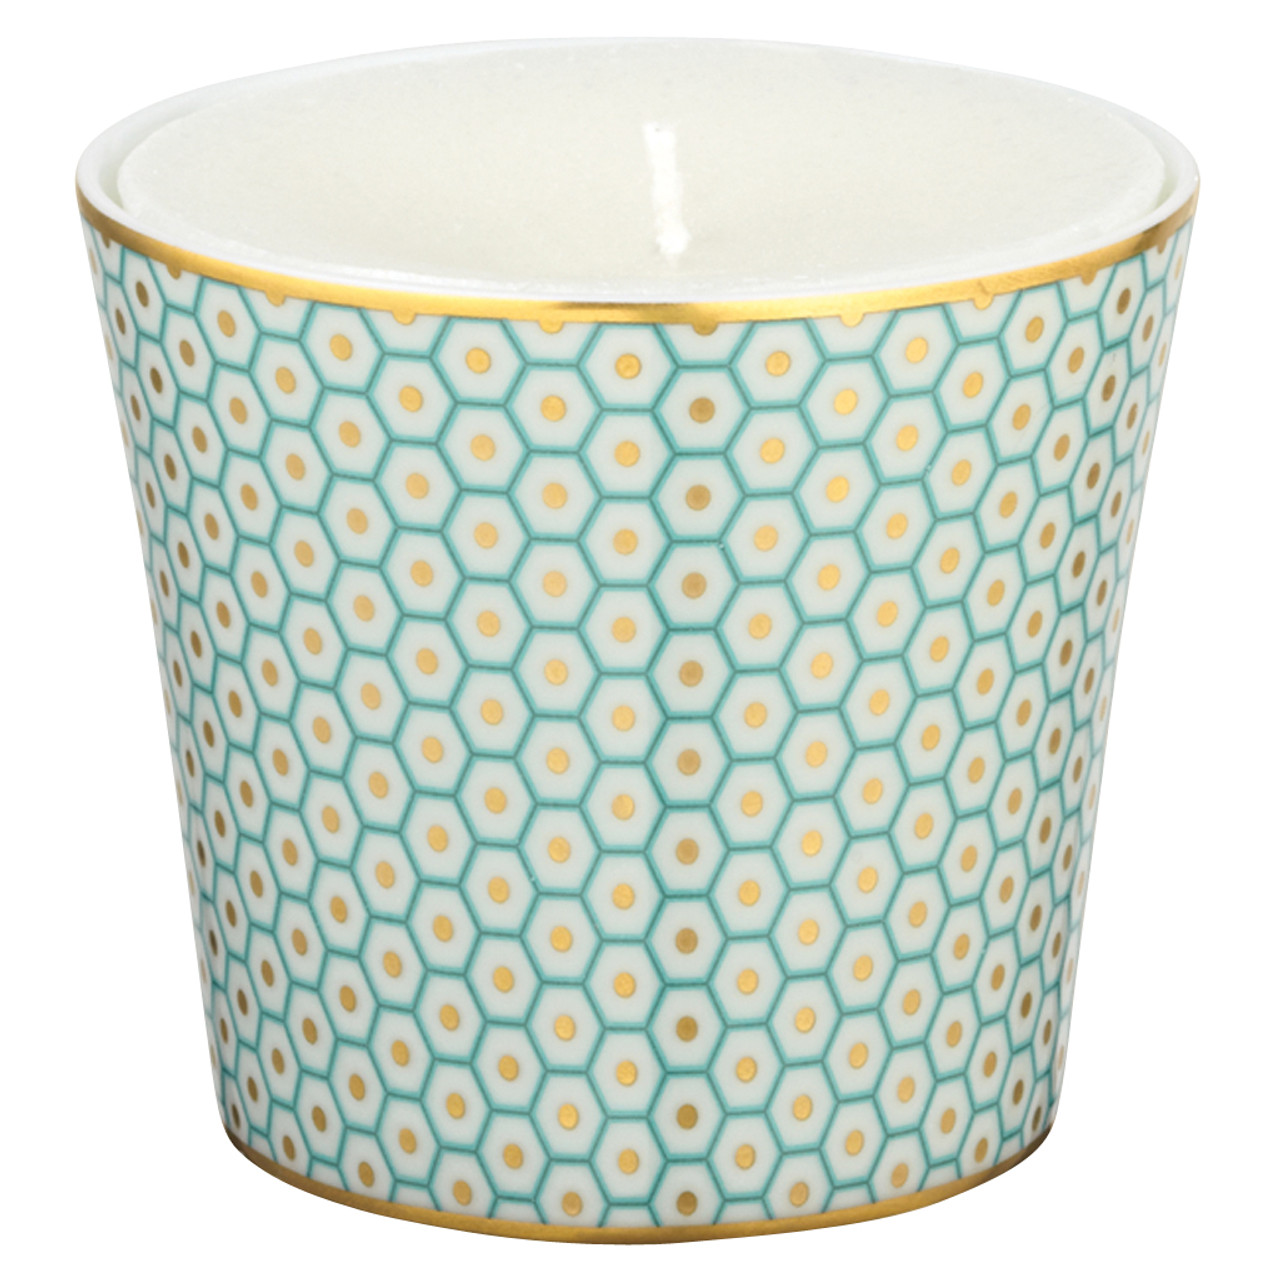 Turquoise Candle Pot, 3 2/7 inch, Tresor